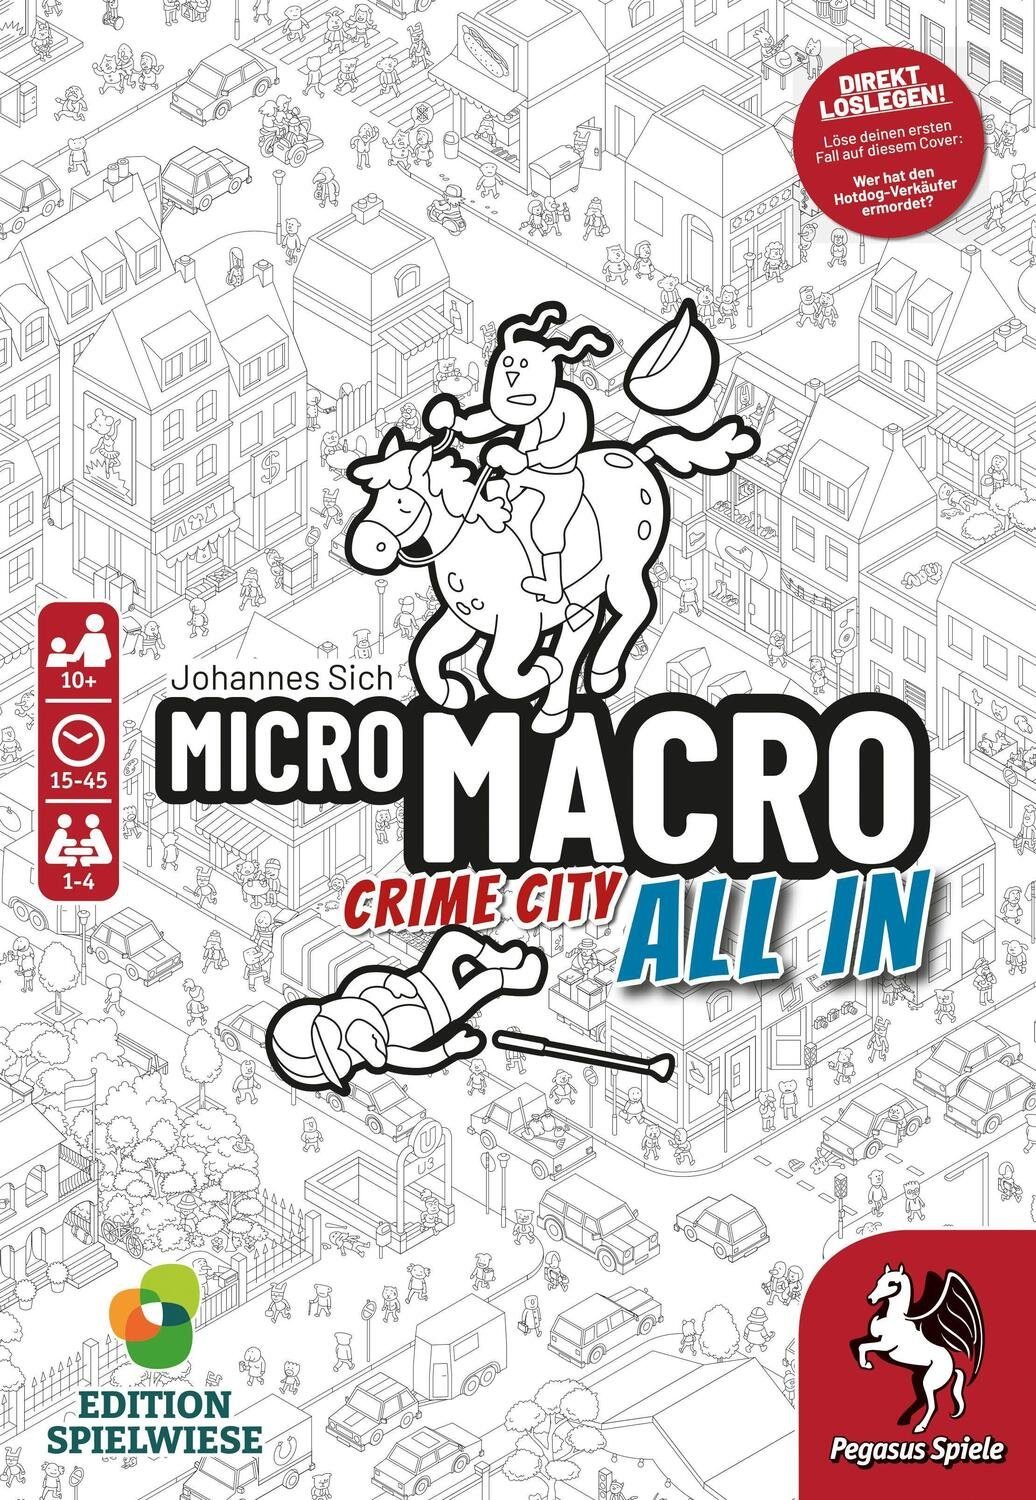 Pegasus Spiele Spiel, MicroMacro: Crime City - (Edition 3 In Spielwiese) All